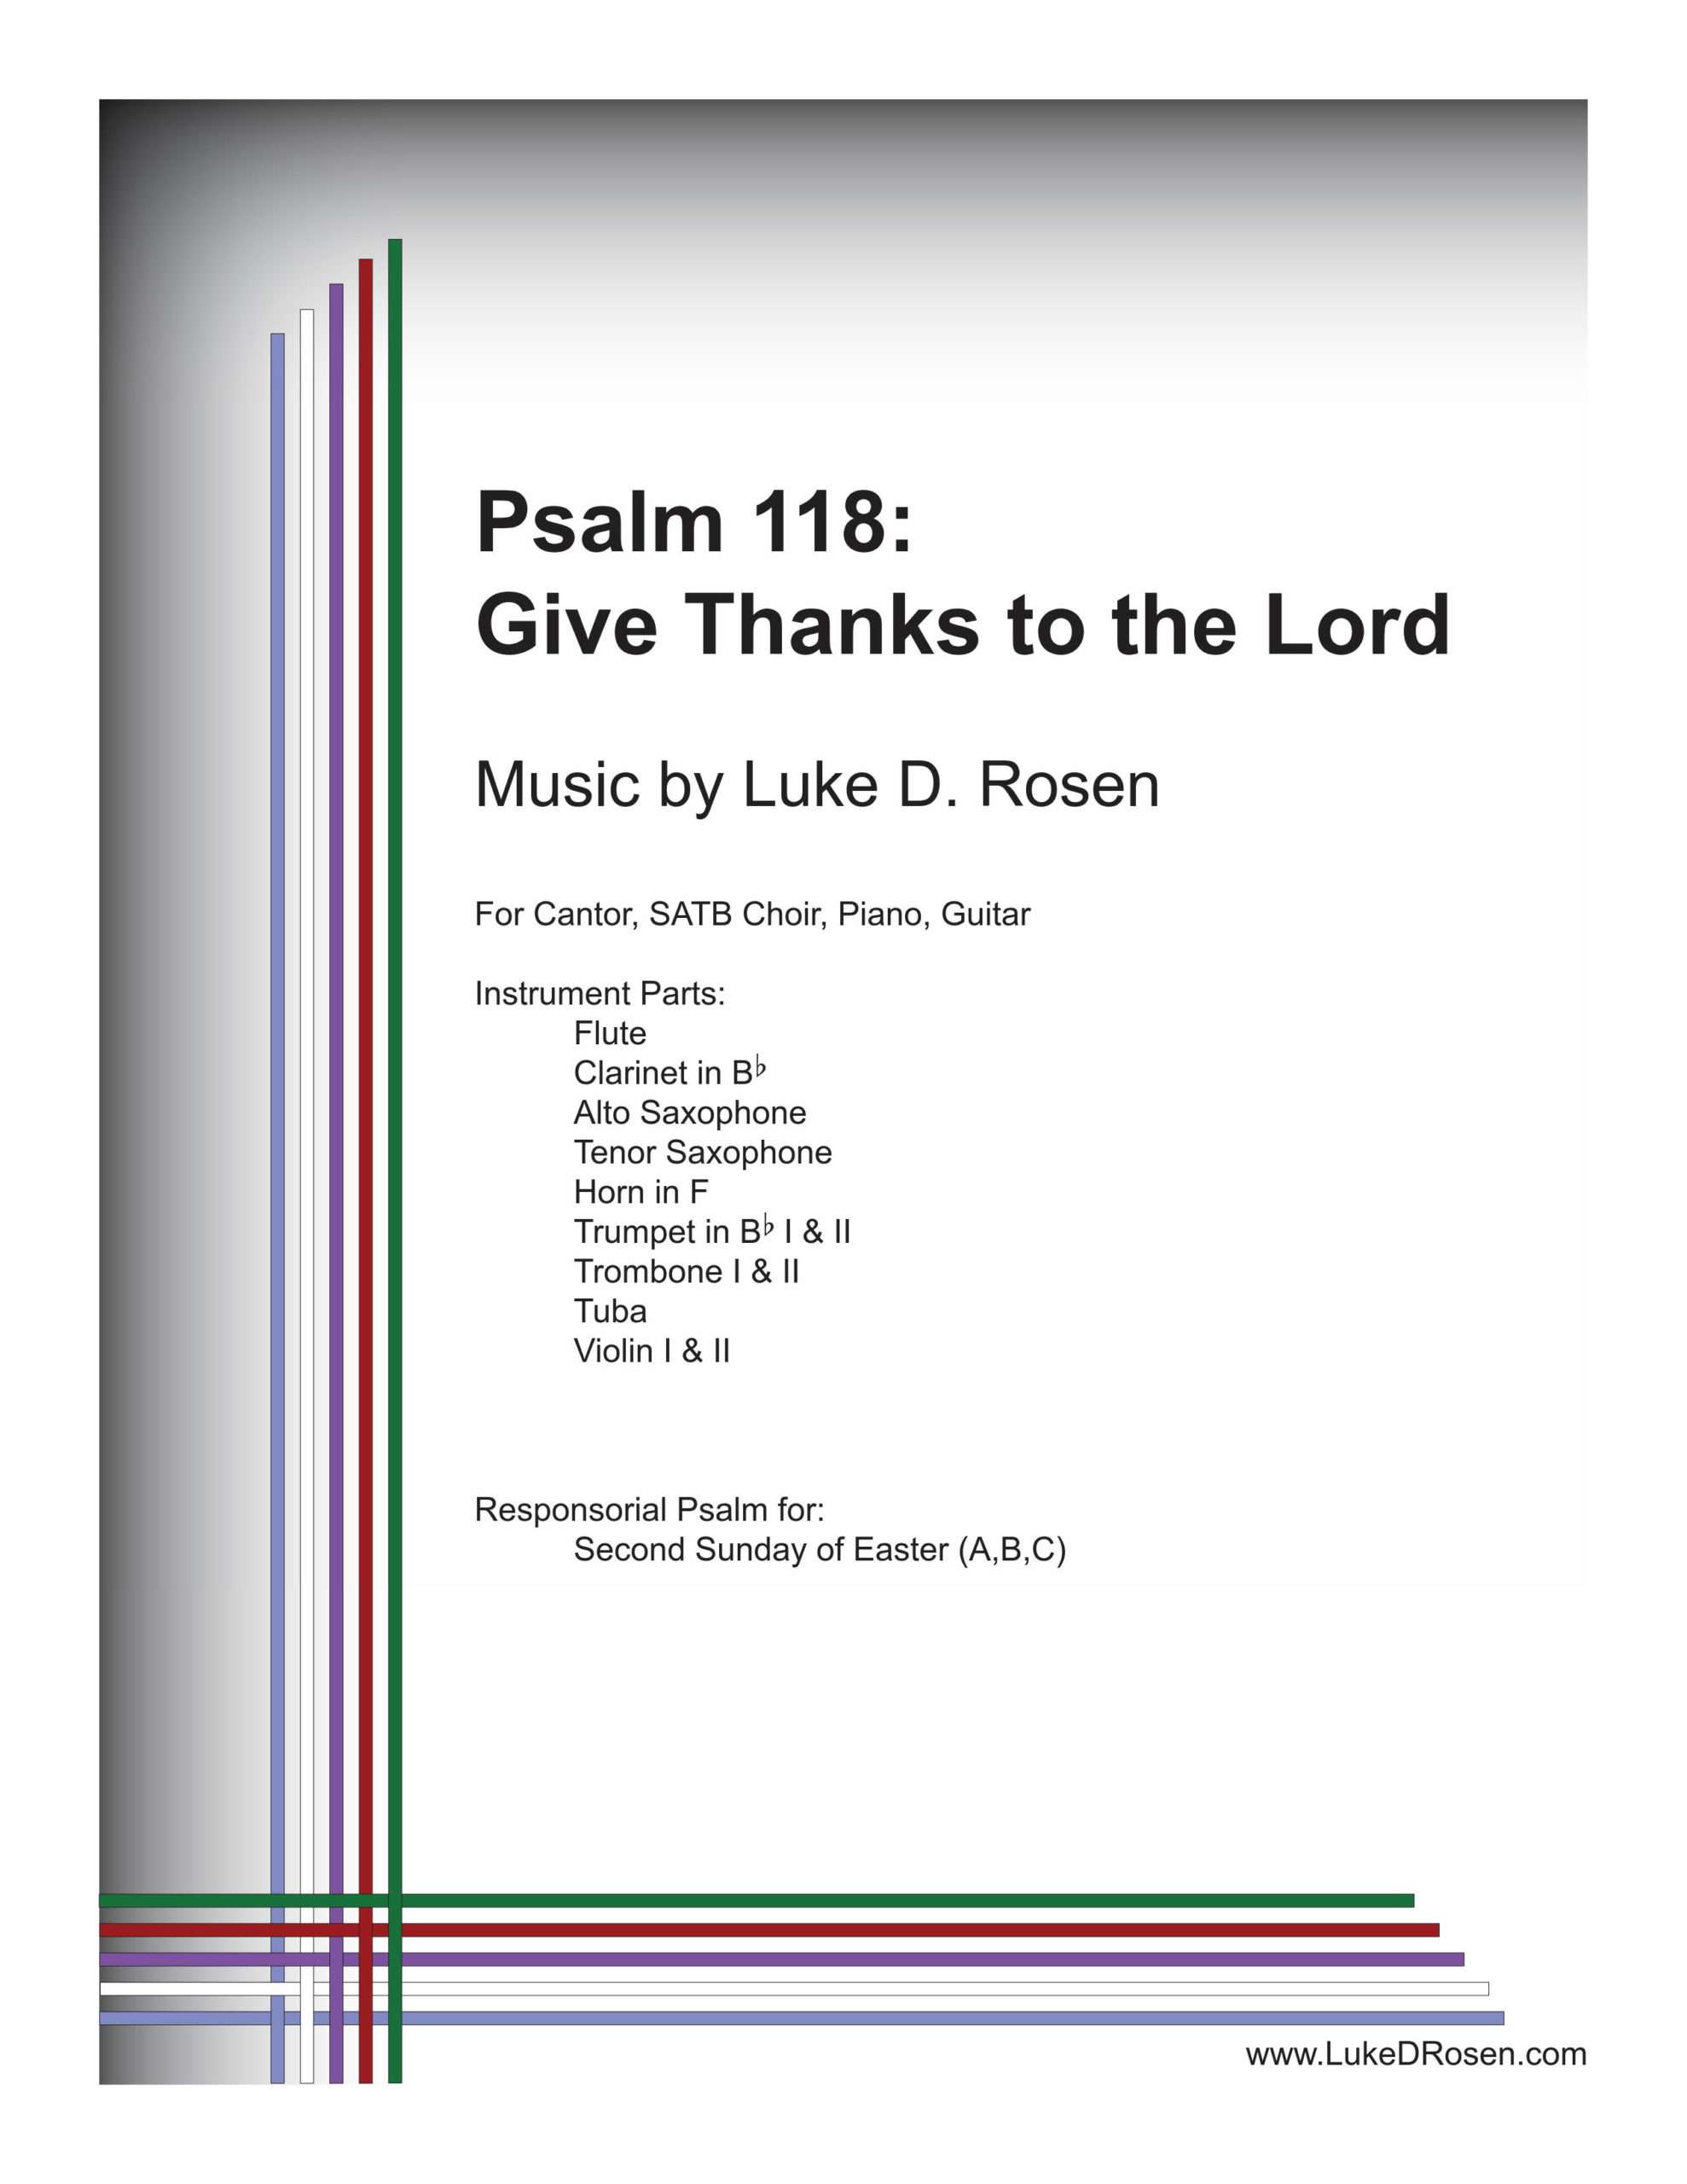 Psalm 118 – Give Thanks to the Lord (Rosen)